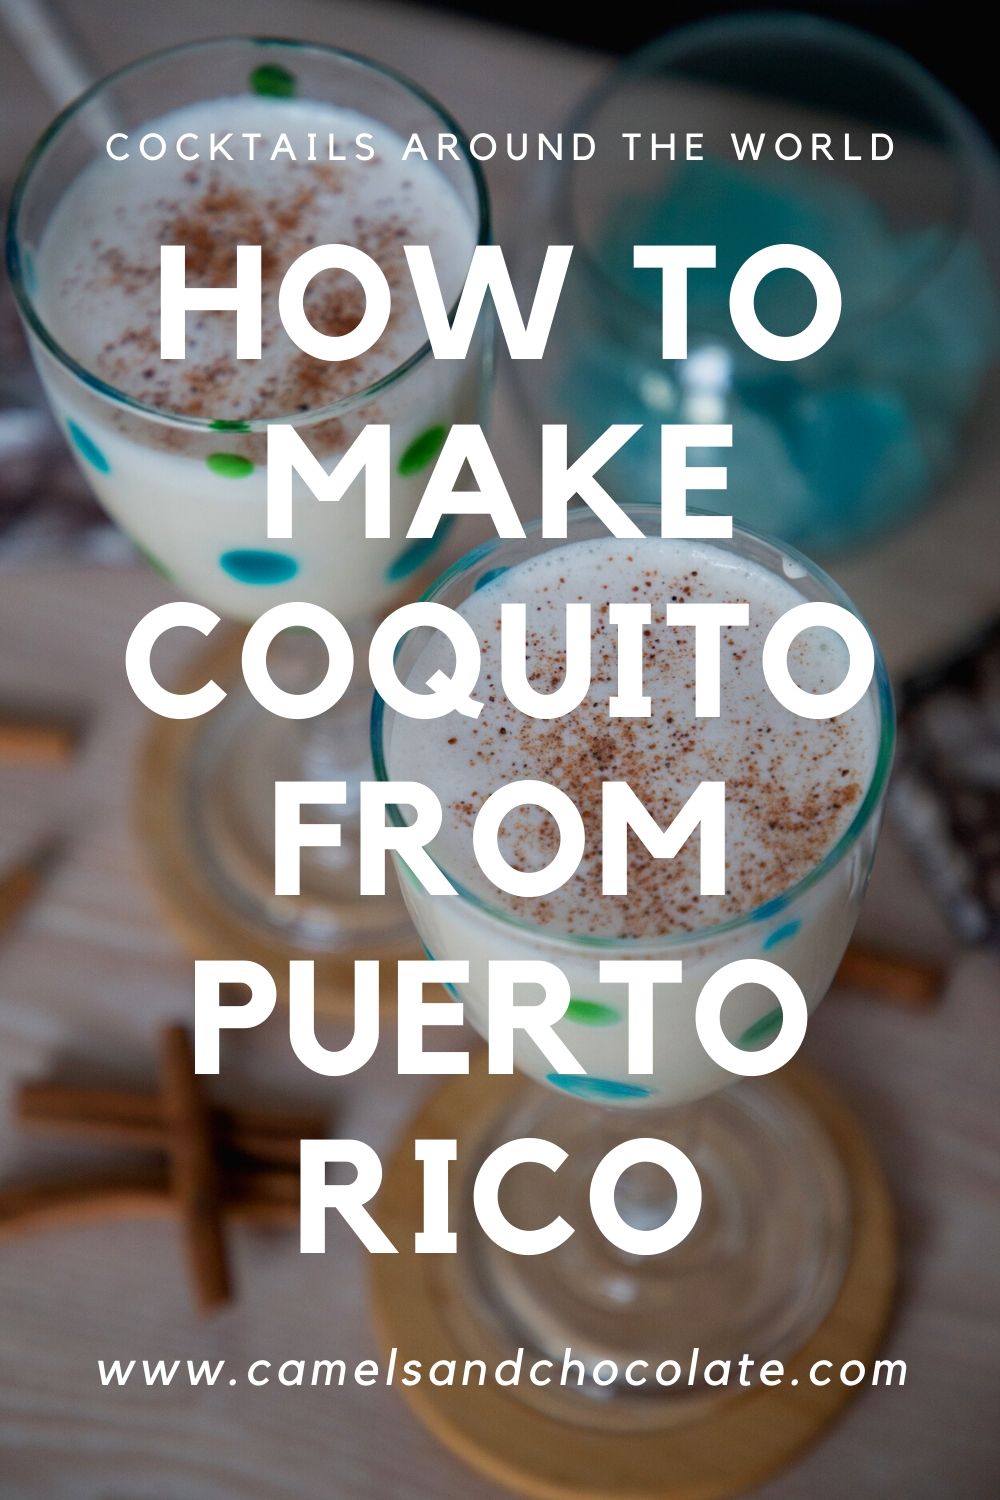 How to Make a Coquito Cocktails from Puerto Rico